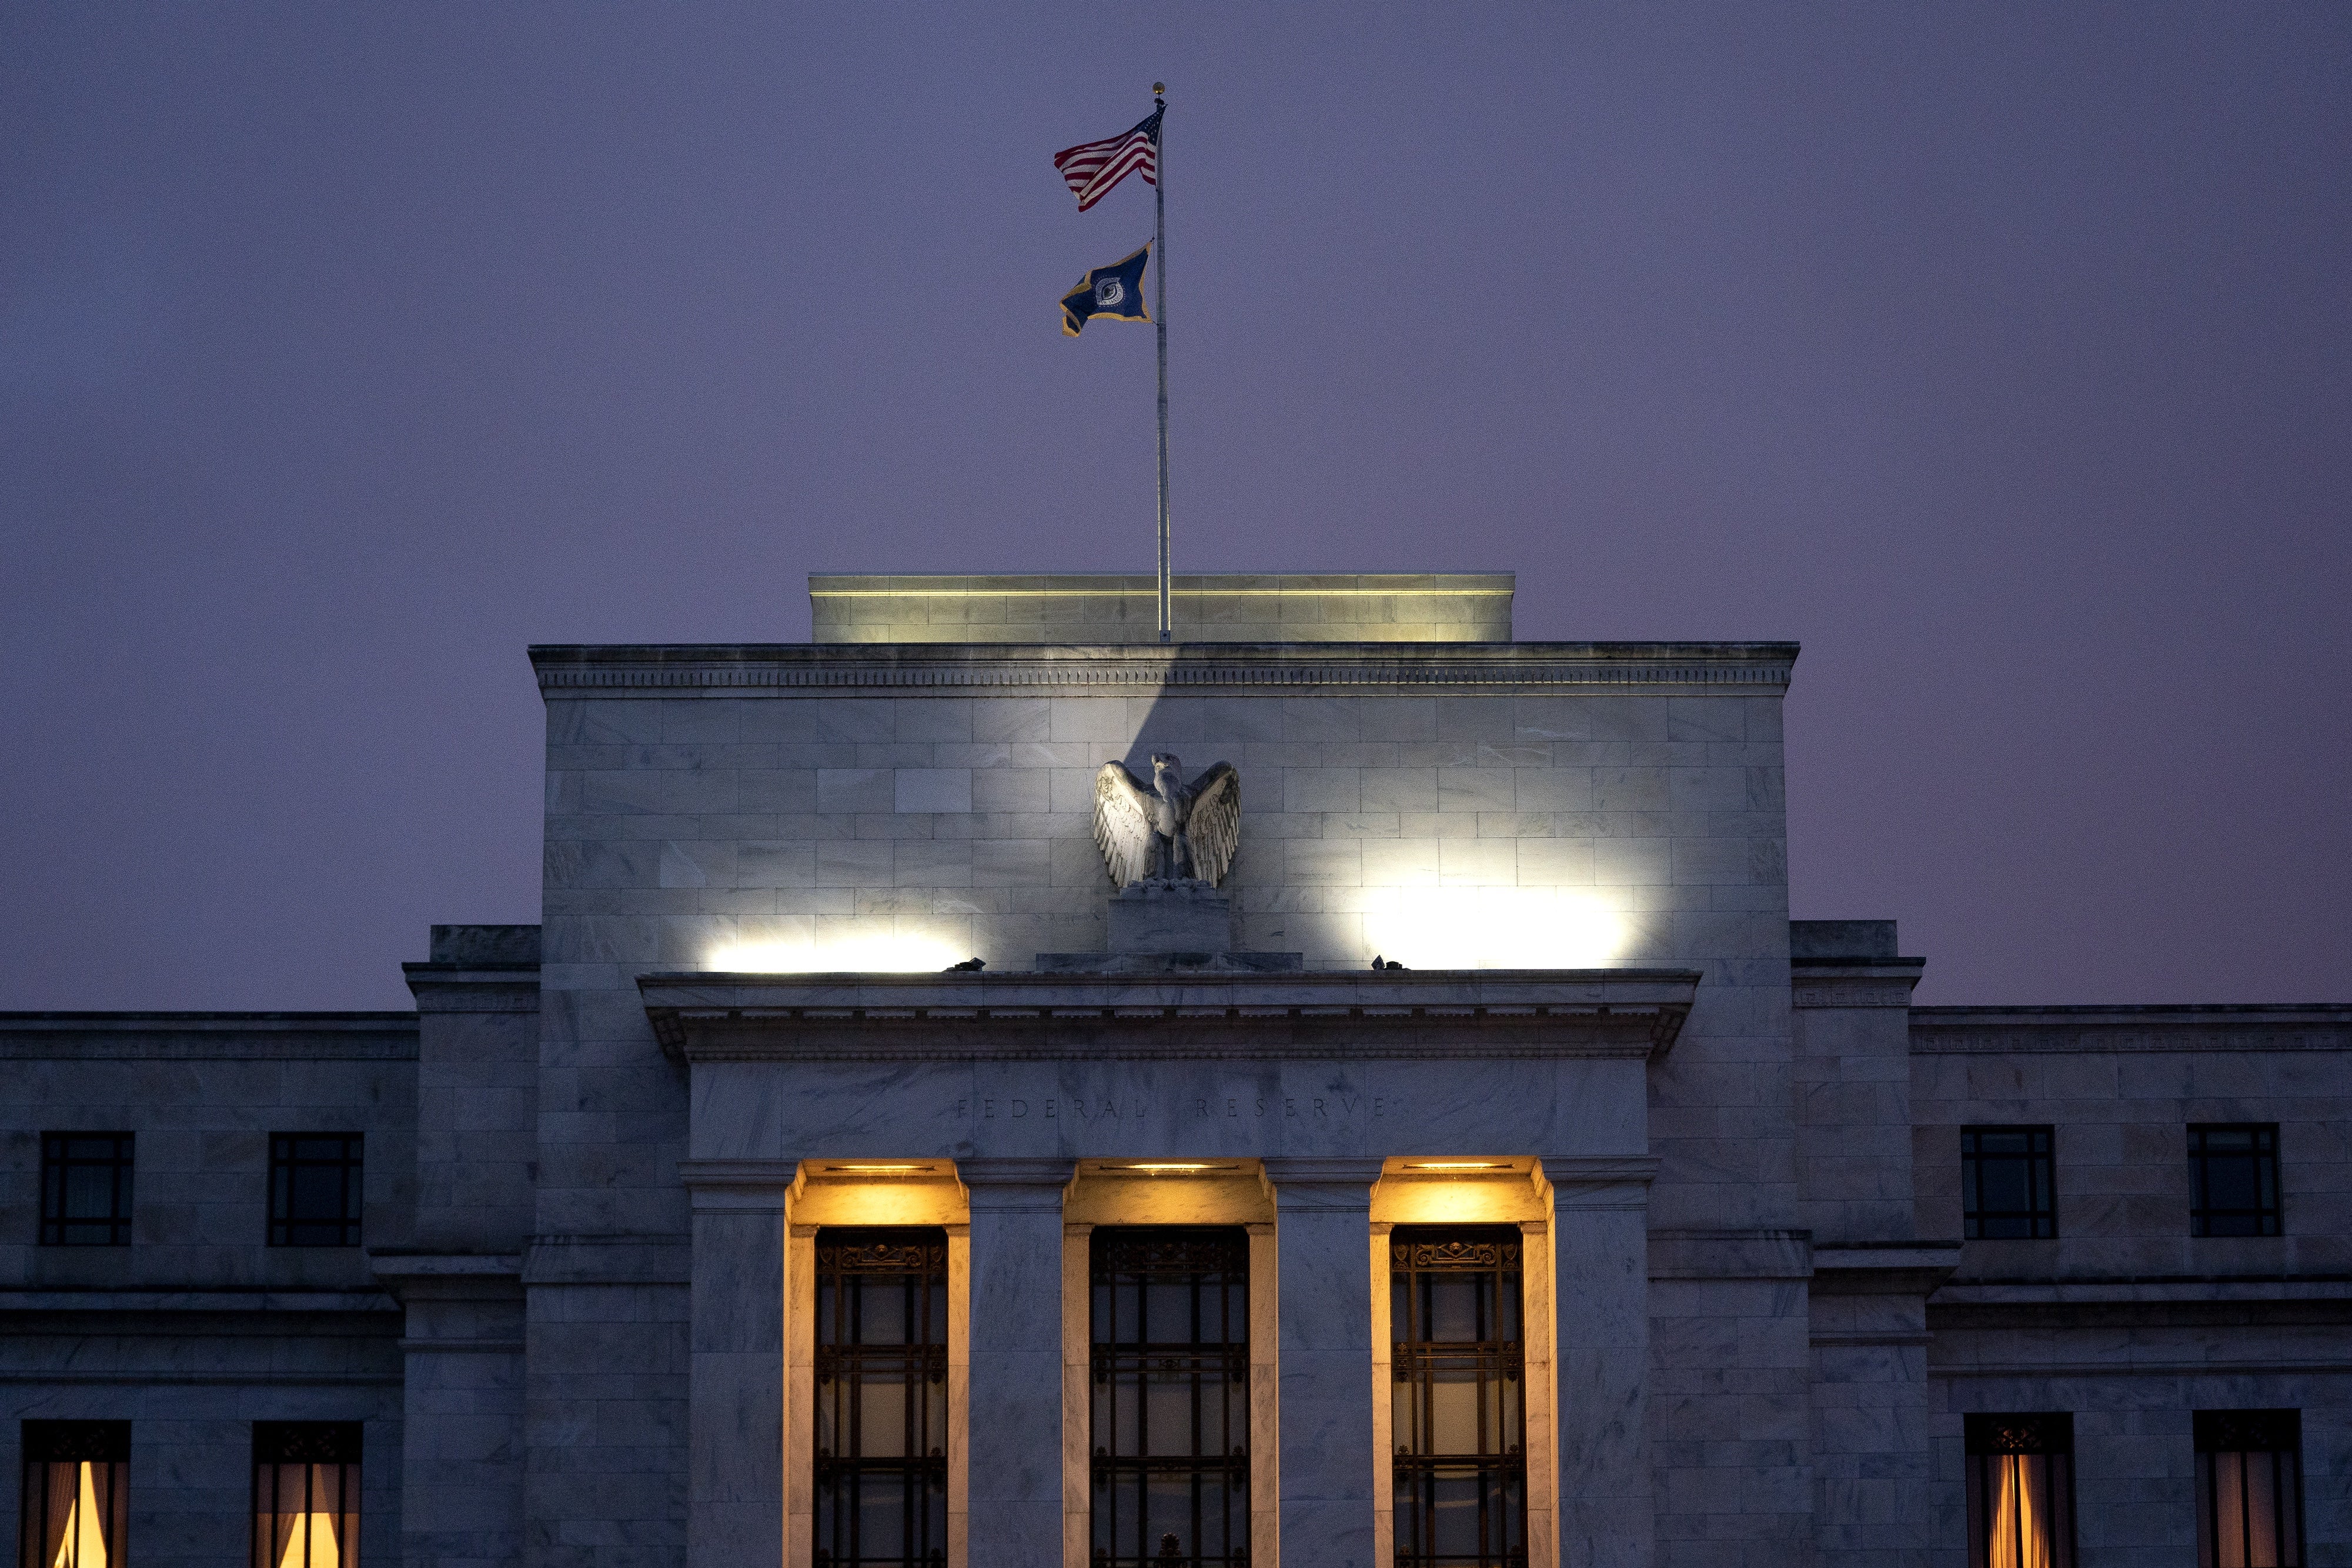 Federal Reserve Building in purple sky with US flag and 3 illuminated windows.